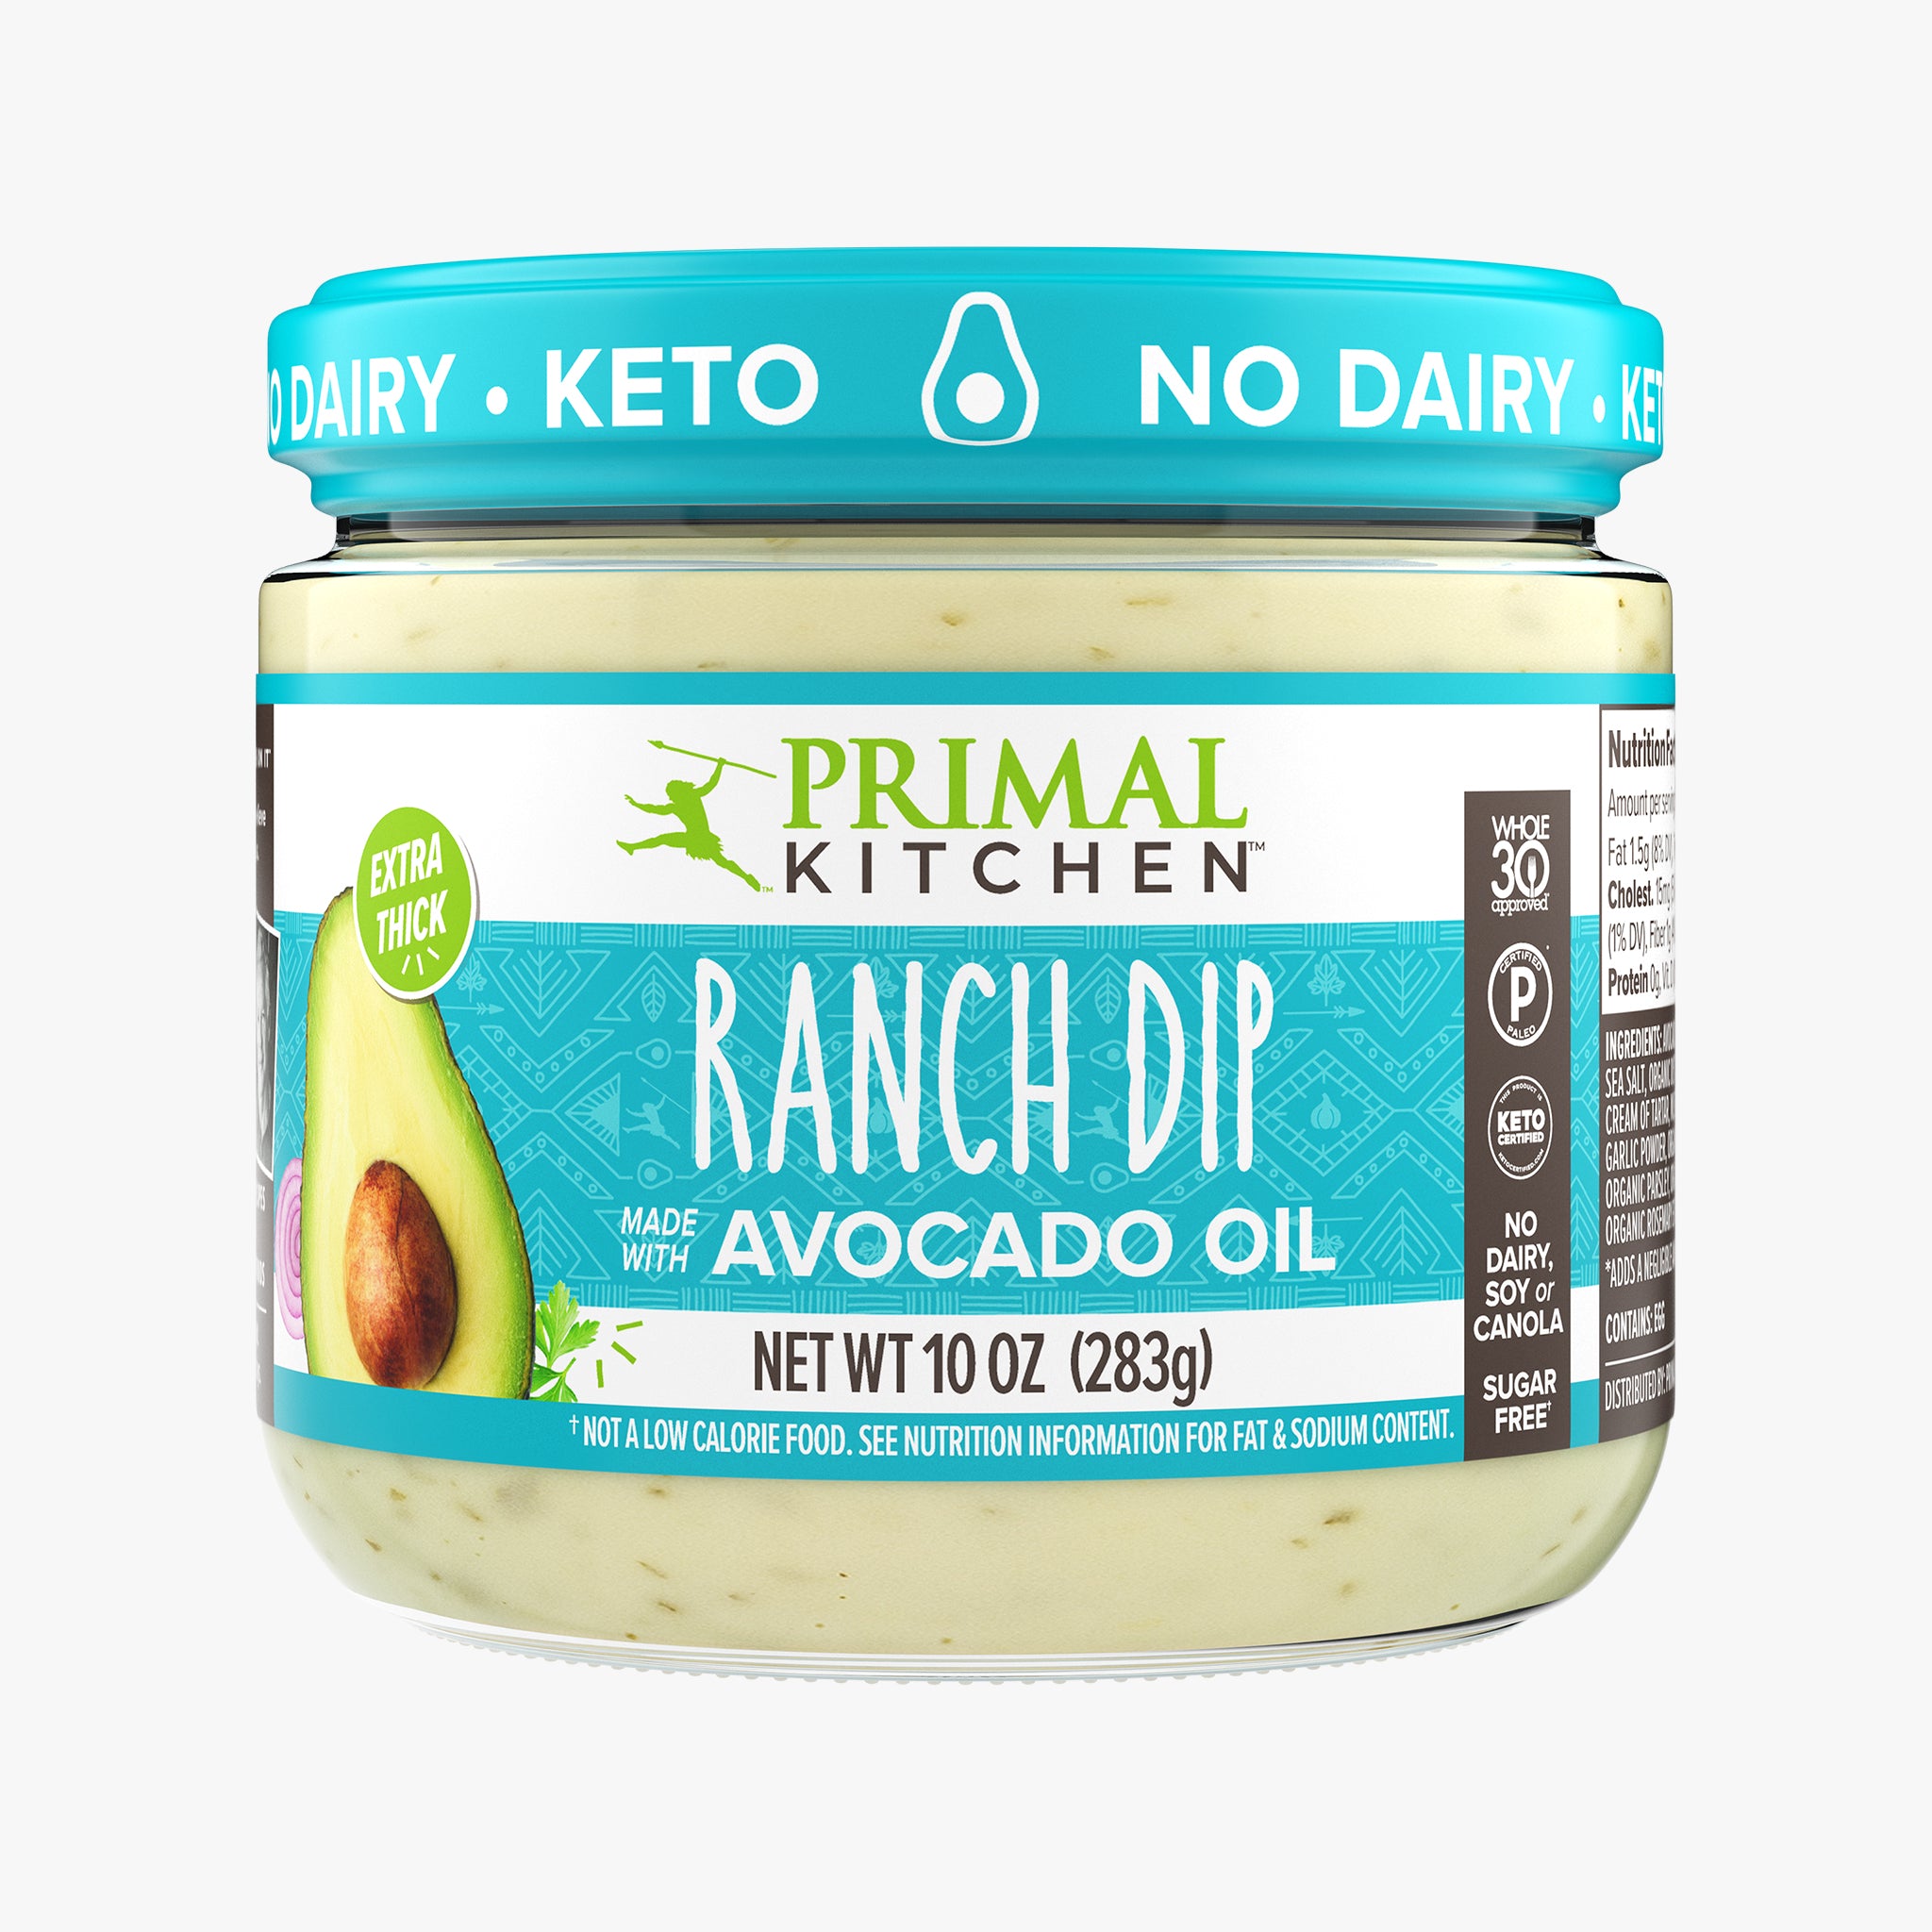 A jar of Primal Kitchen Ranch Dip Made with Avocado Oil with a light blue label on a light grey background.